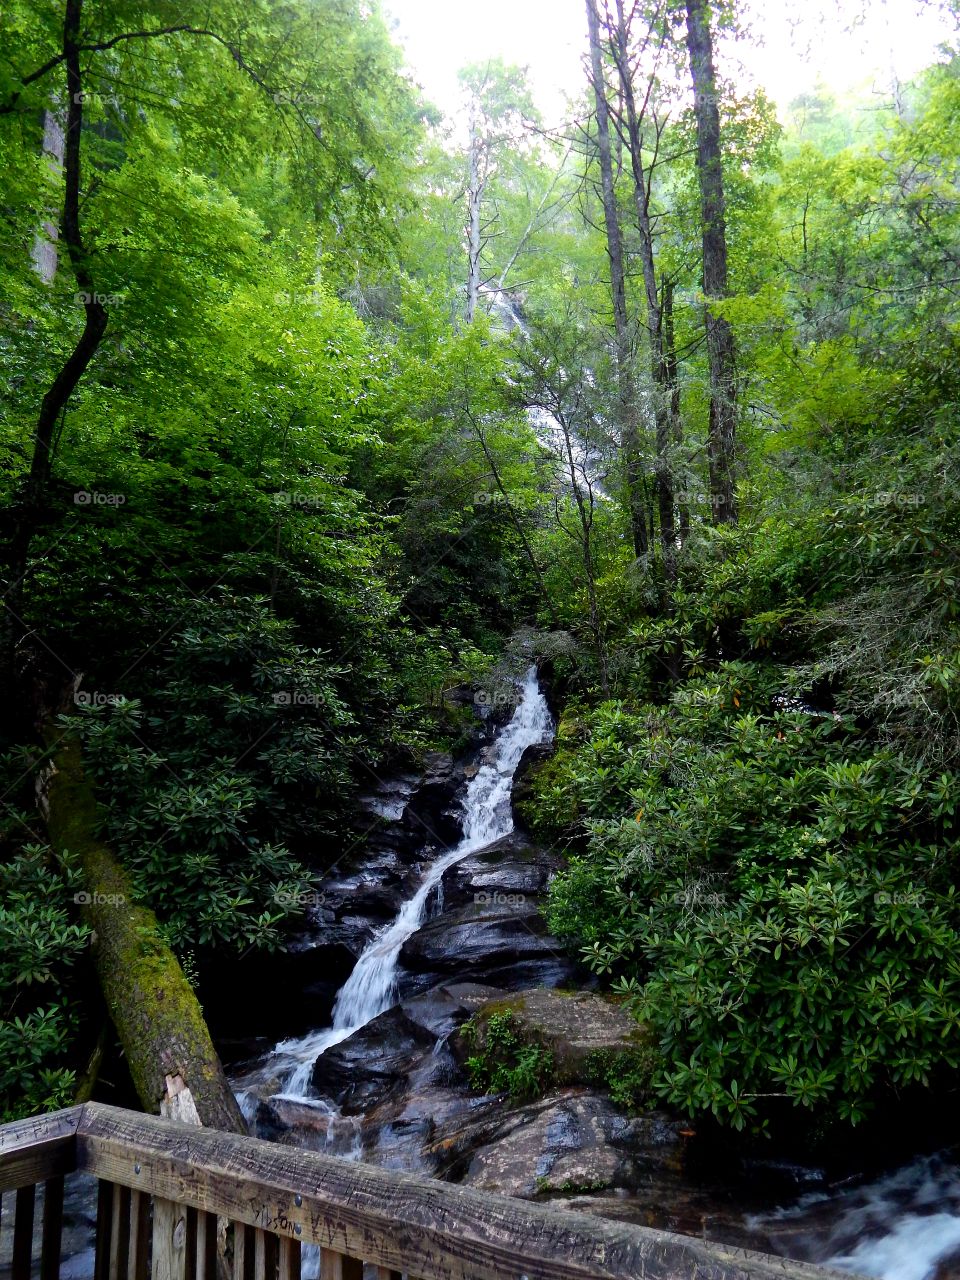 Section of waterfall surrounded by green foliage at Dukes creek falls in the North Georgia mountains